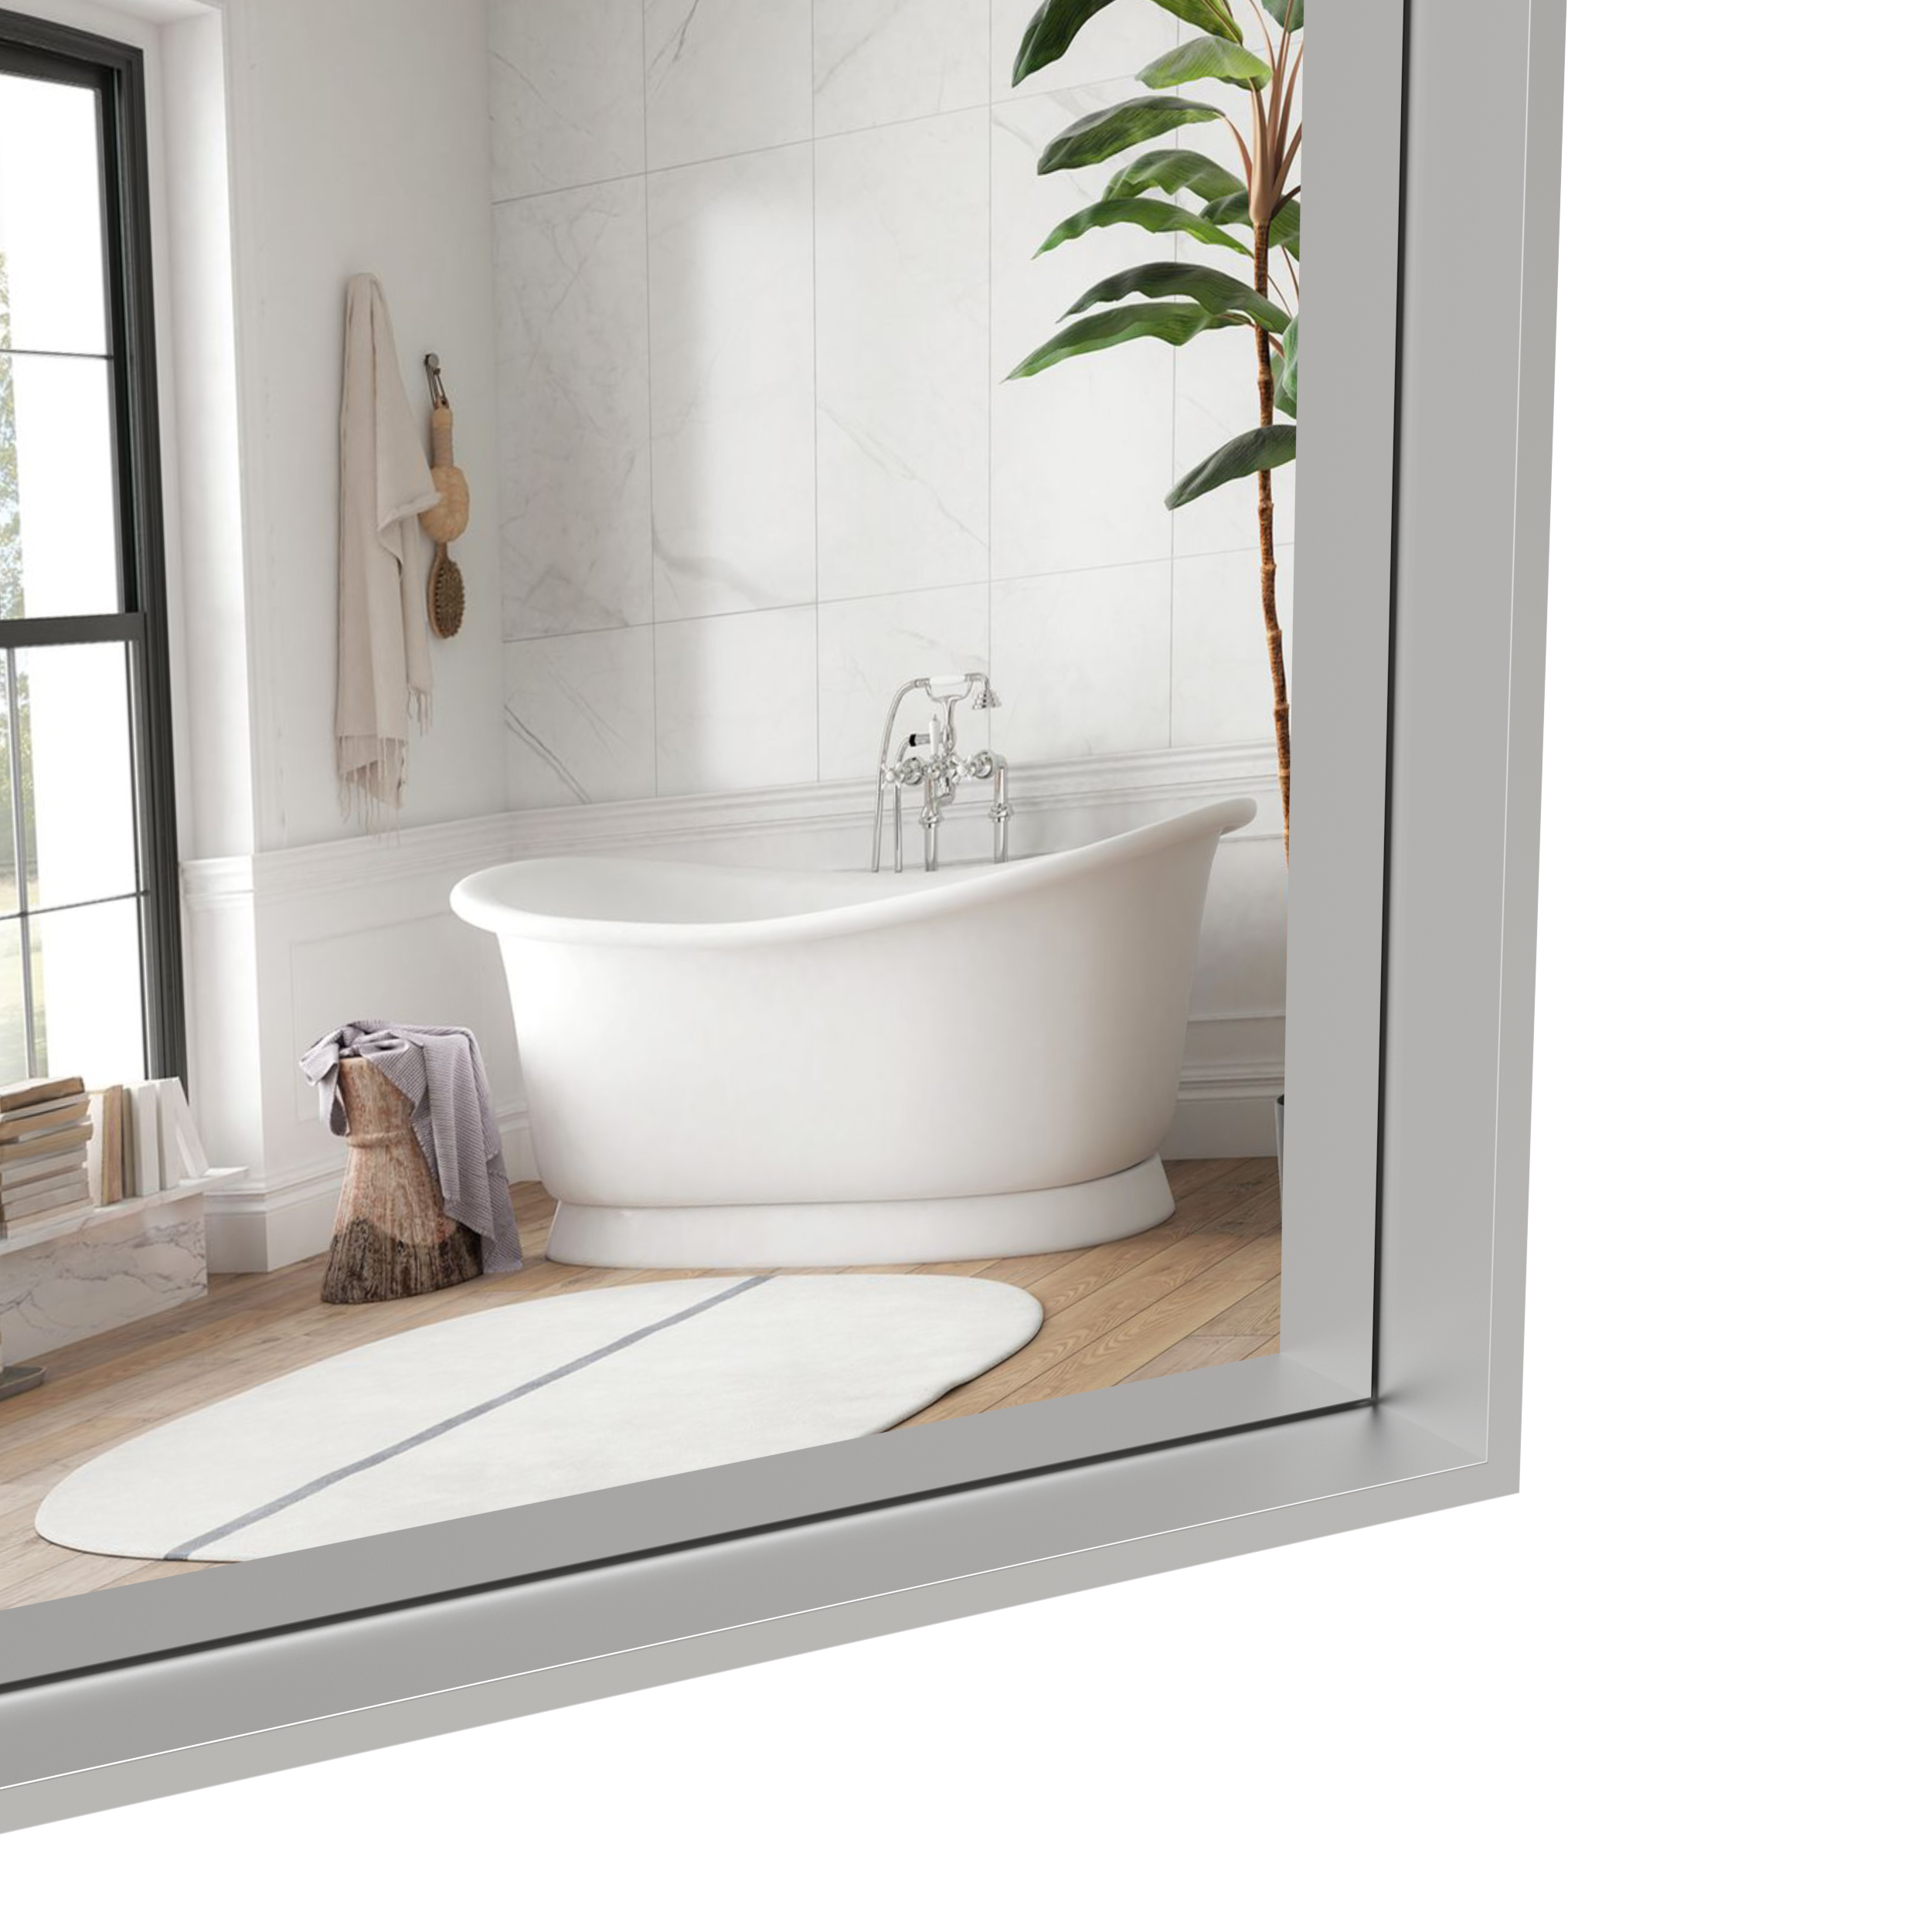 60*36" Oversized Modern Rectangle Bathroom Mirror with Silver Frame Decorative Large Wall Mirrors for Bathroom Living Room Bedroom Vertical or Horizontal Wall Mounted mirror with Aluminum Frame